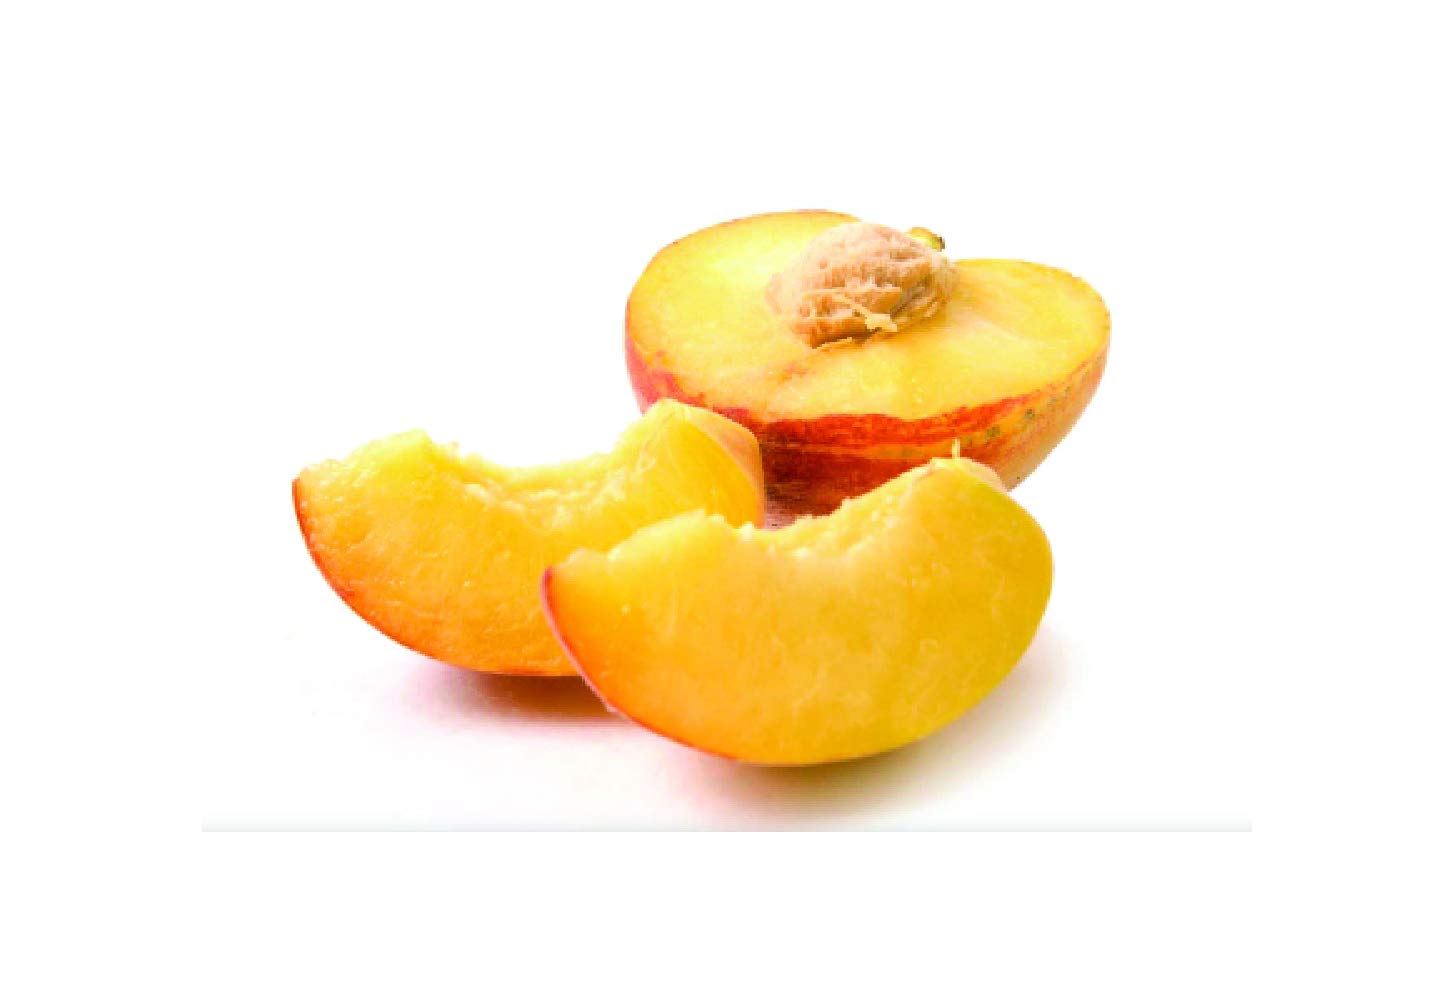 American Food Supply Freeze Dried Peach Slices